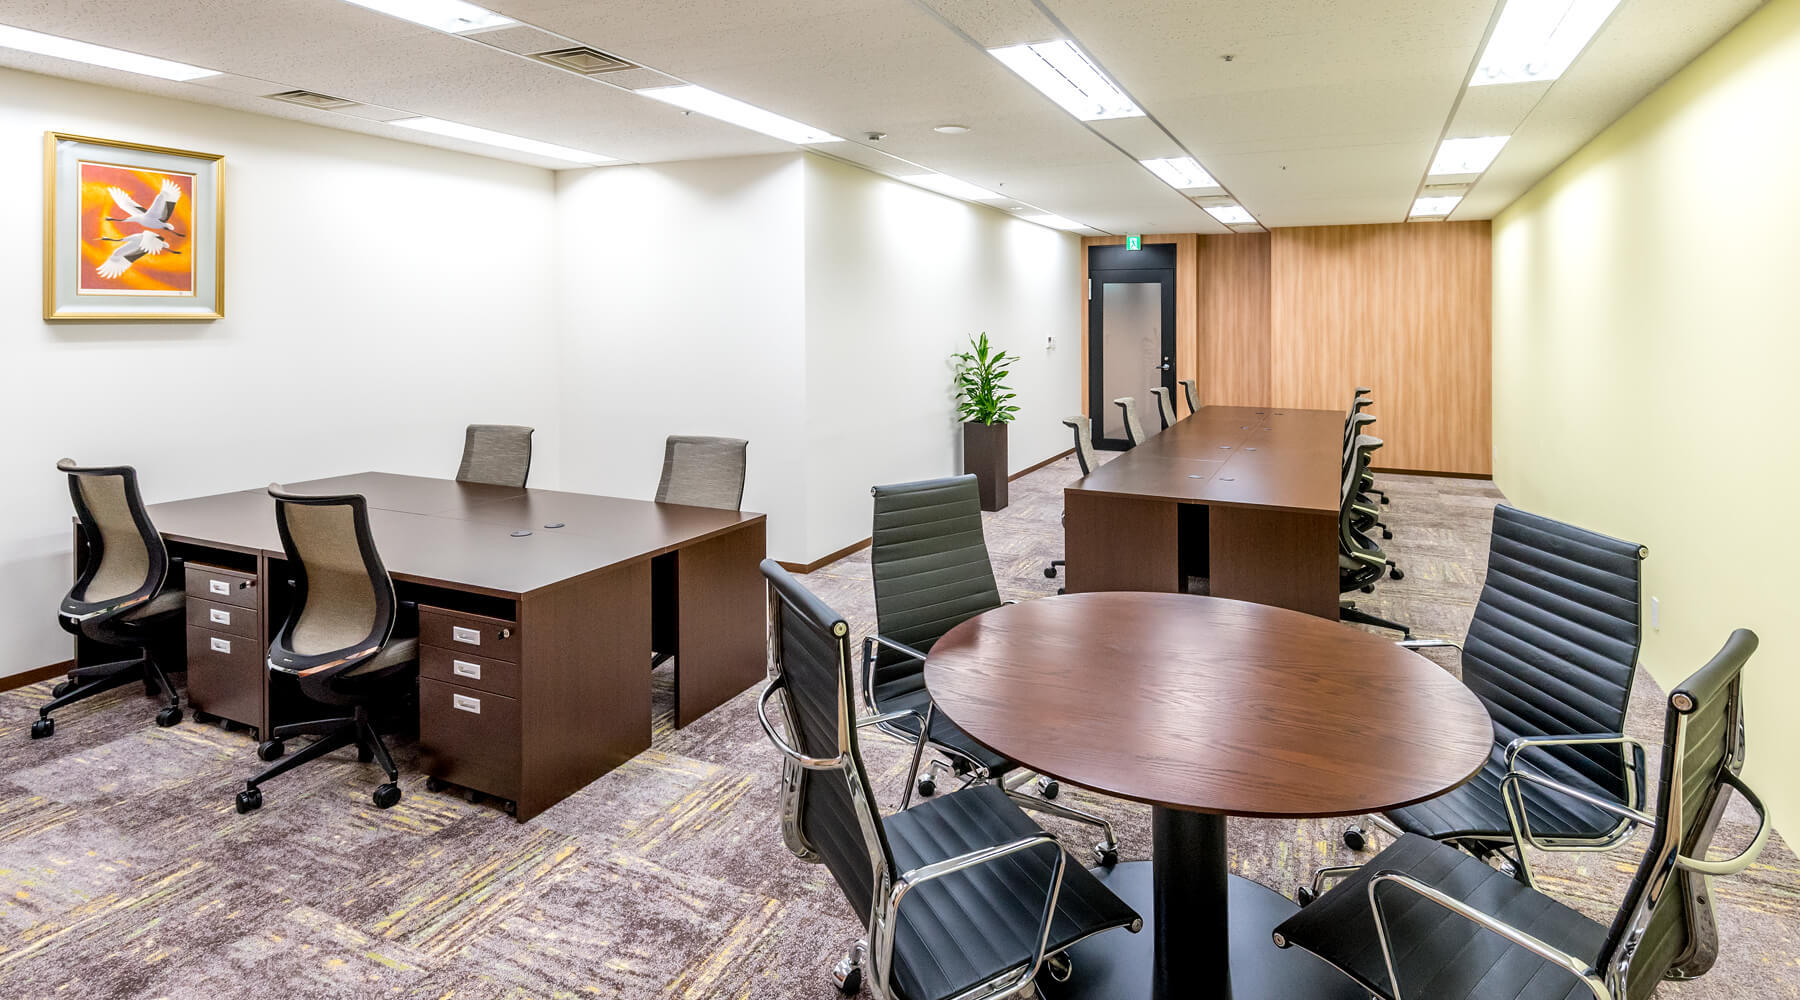 Private rooms_Expert Office GRAND Shimbashi / Uchisaiwaicho can accommodate up to 50 people, and we can propose private rooms for various numbers of people.